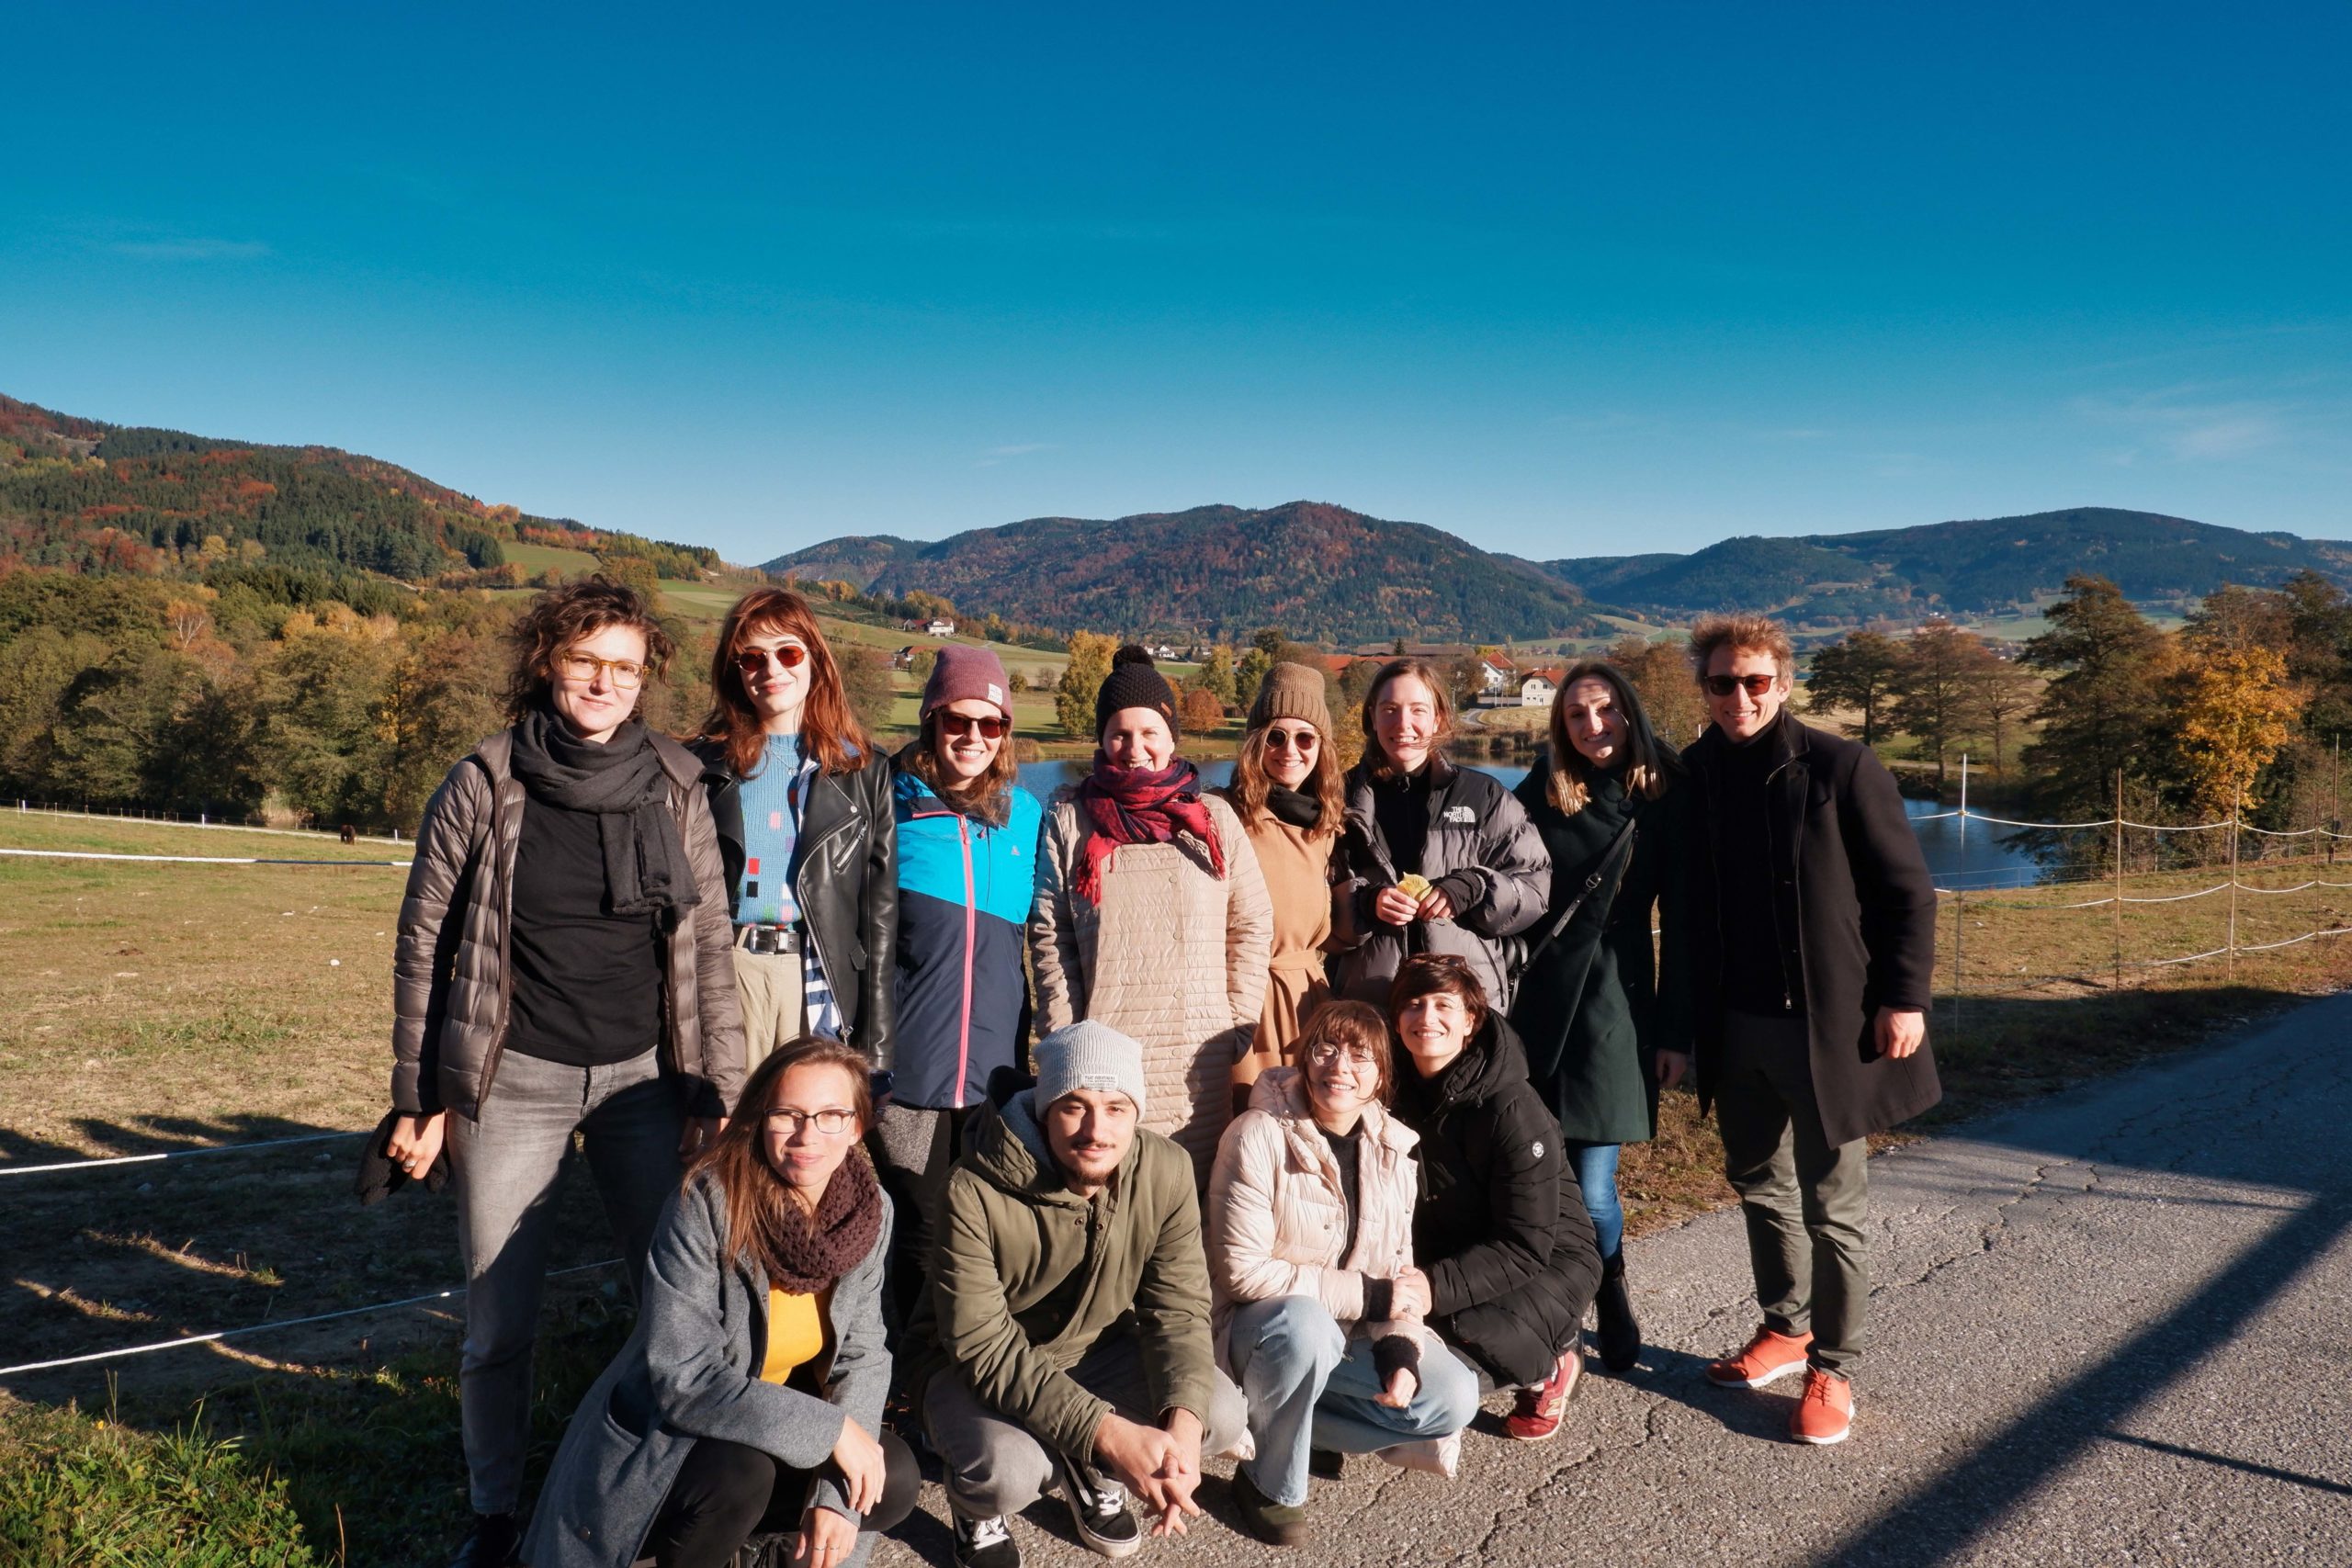 Jakob Detering, SIA coordinators and other members of the SIA international team smiling in front of a picturesque background.